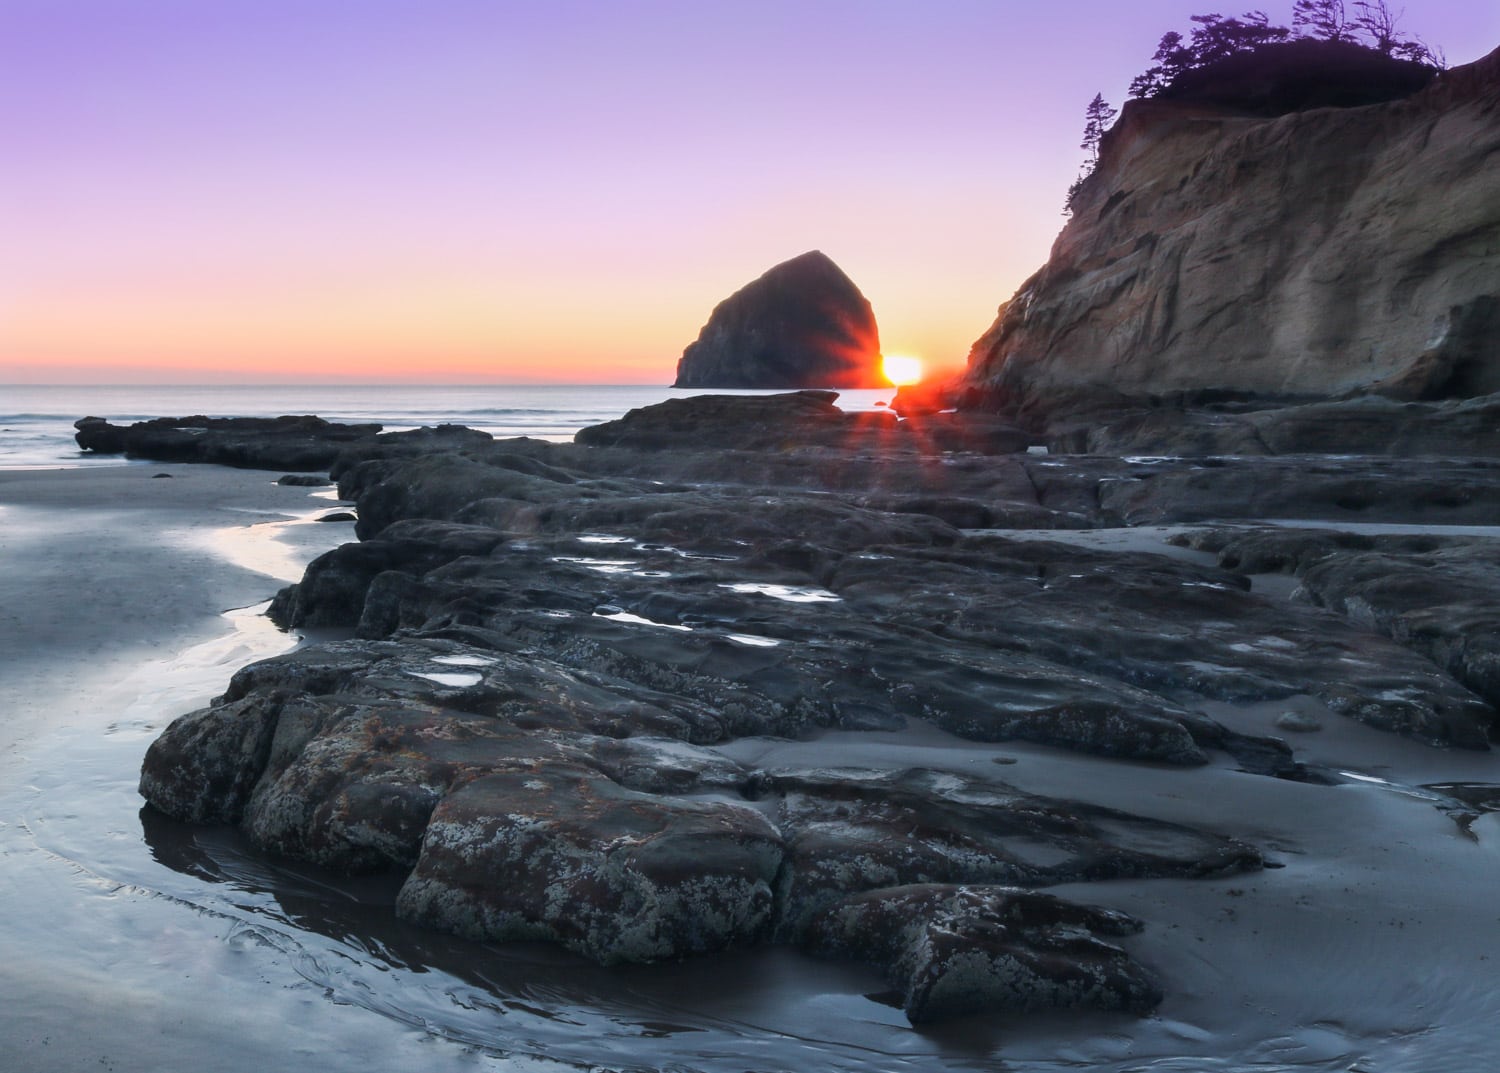 Sunset at beach in Cape Kiwanda, Pacific City - Best Beach Road Trips from Portland, Oregon